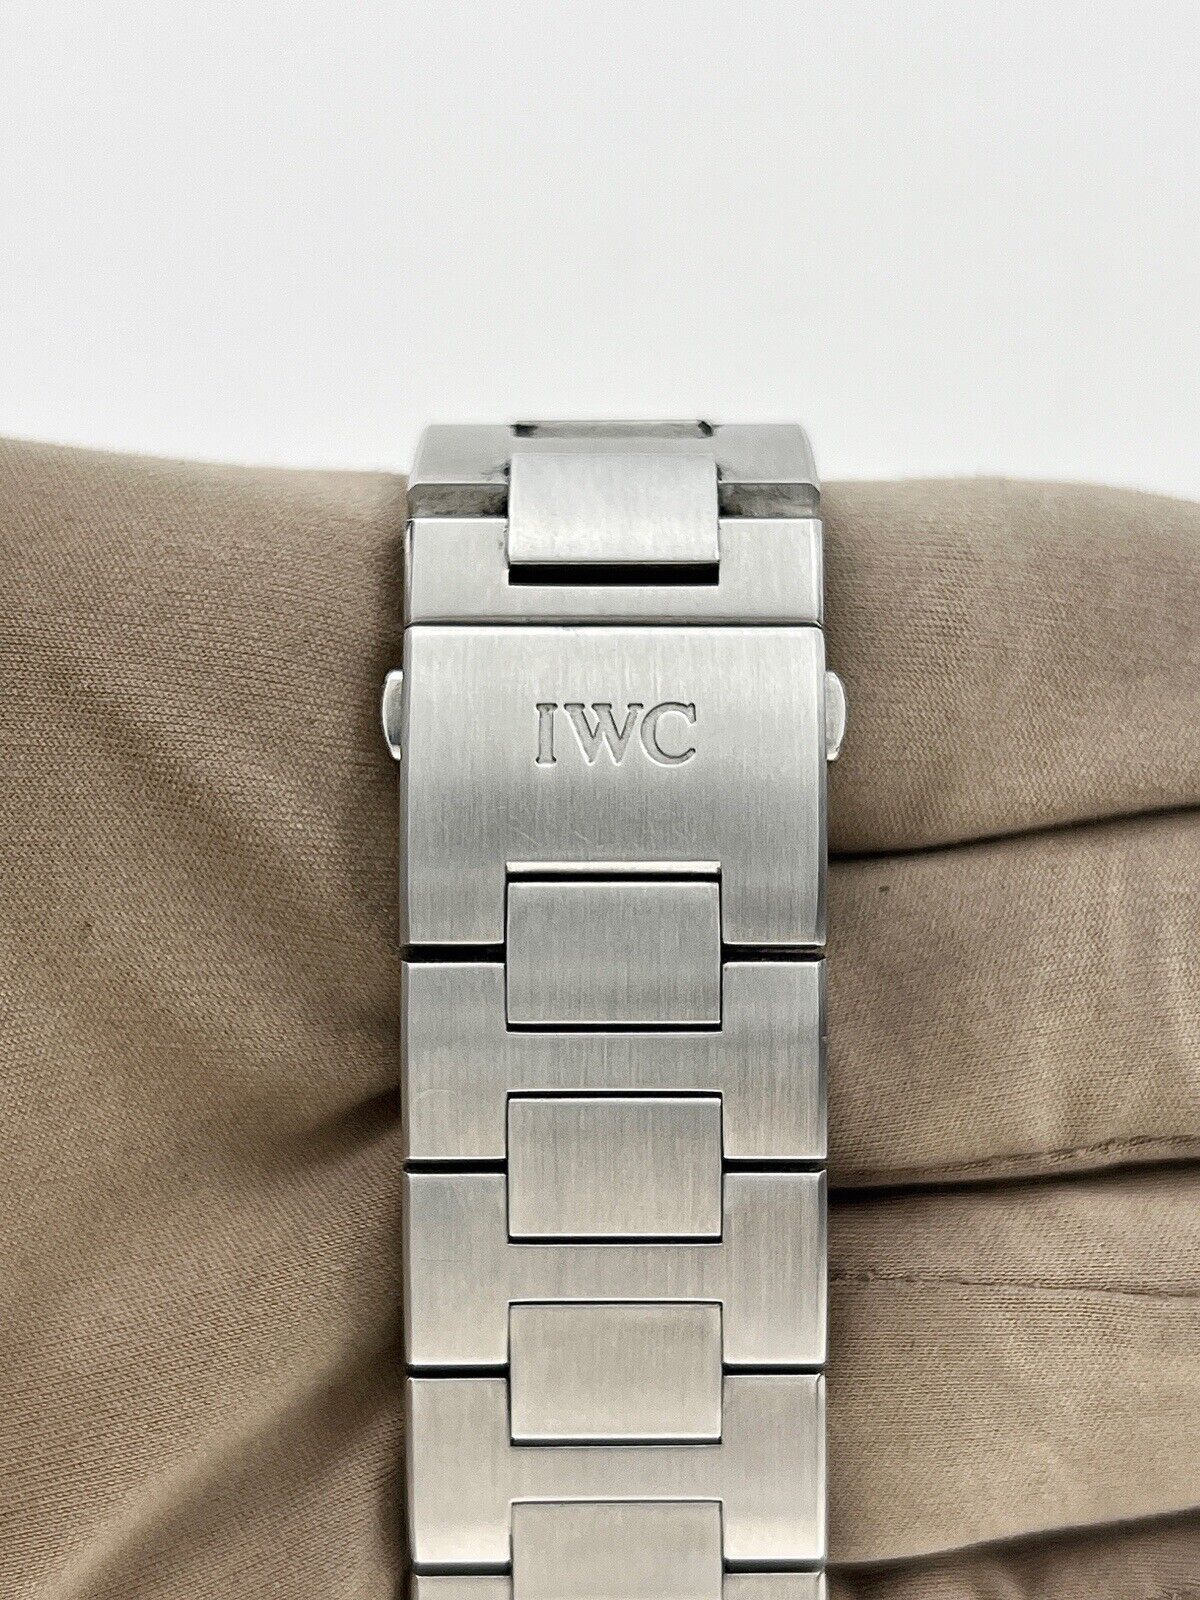 IWC IW329002 Aquatimer Automatic Date Watch 42mm Steel Black Dial Box Papers